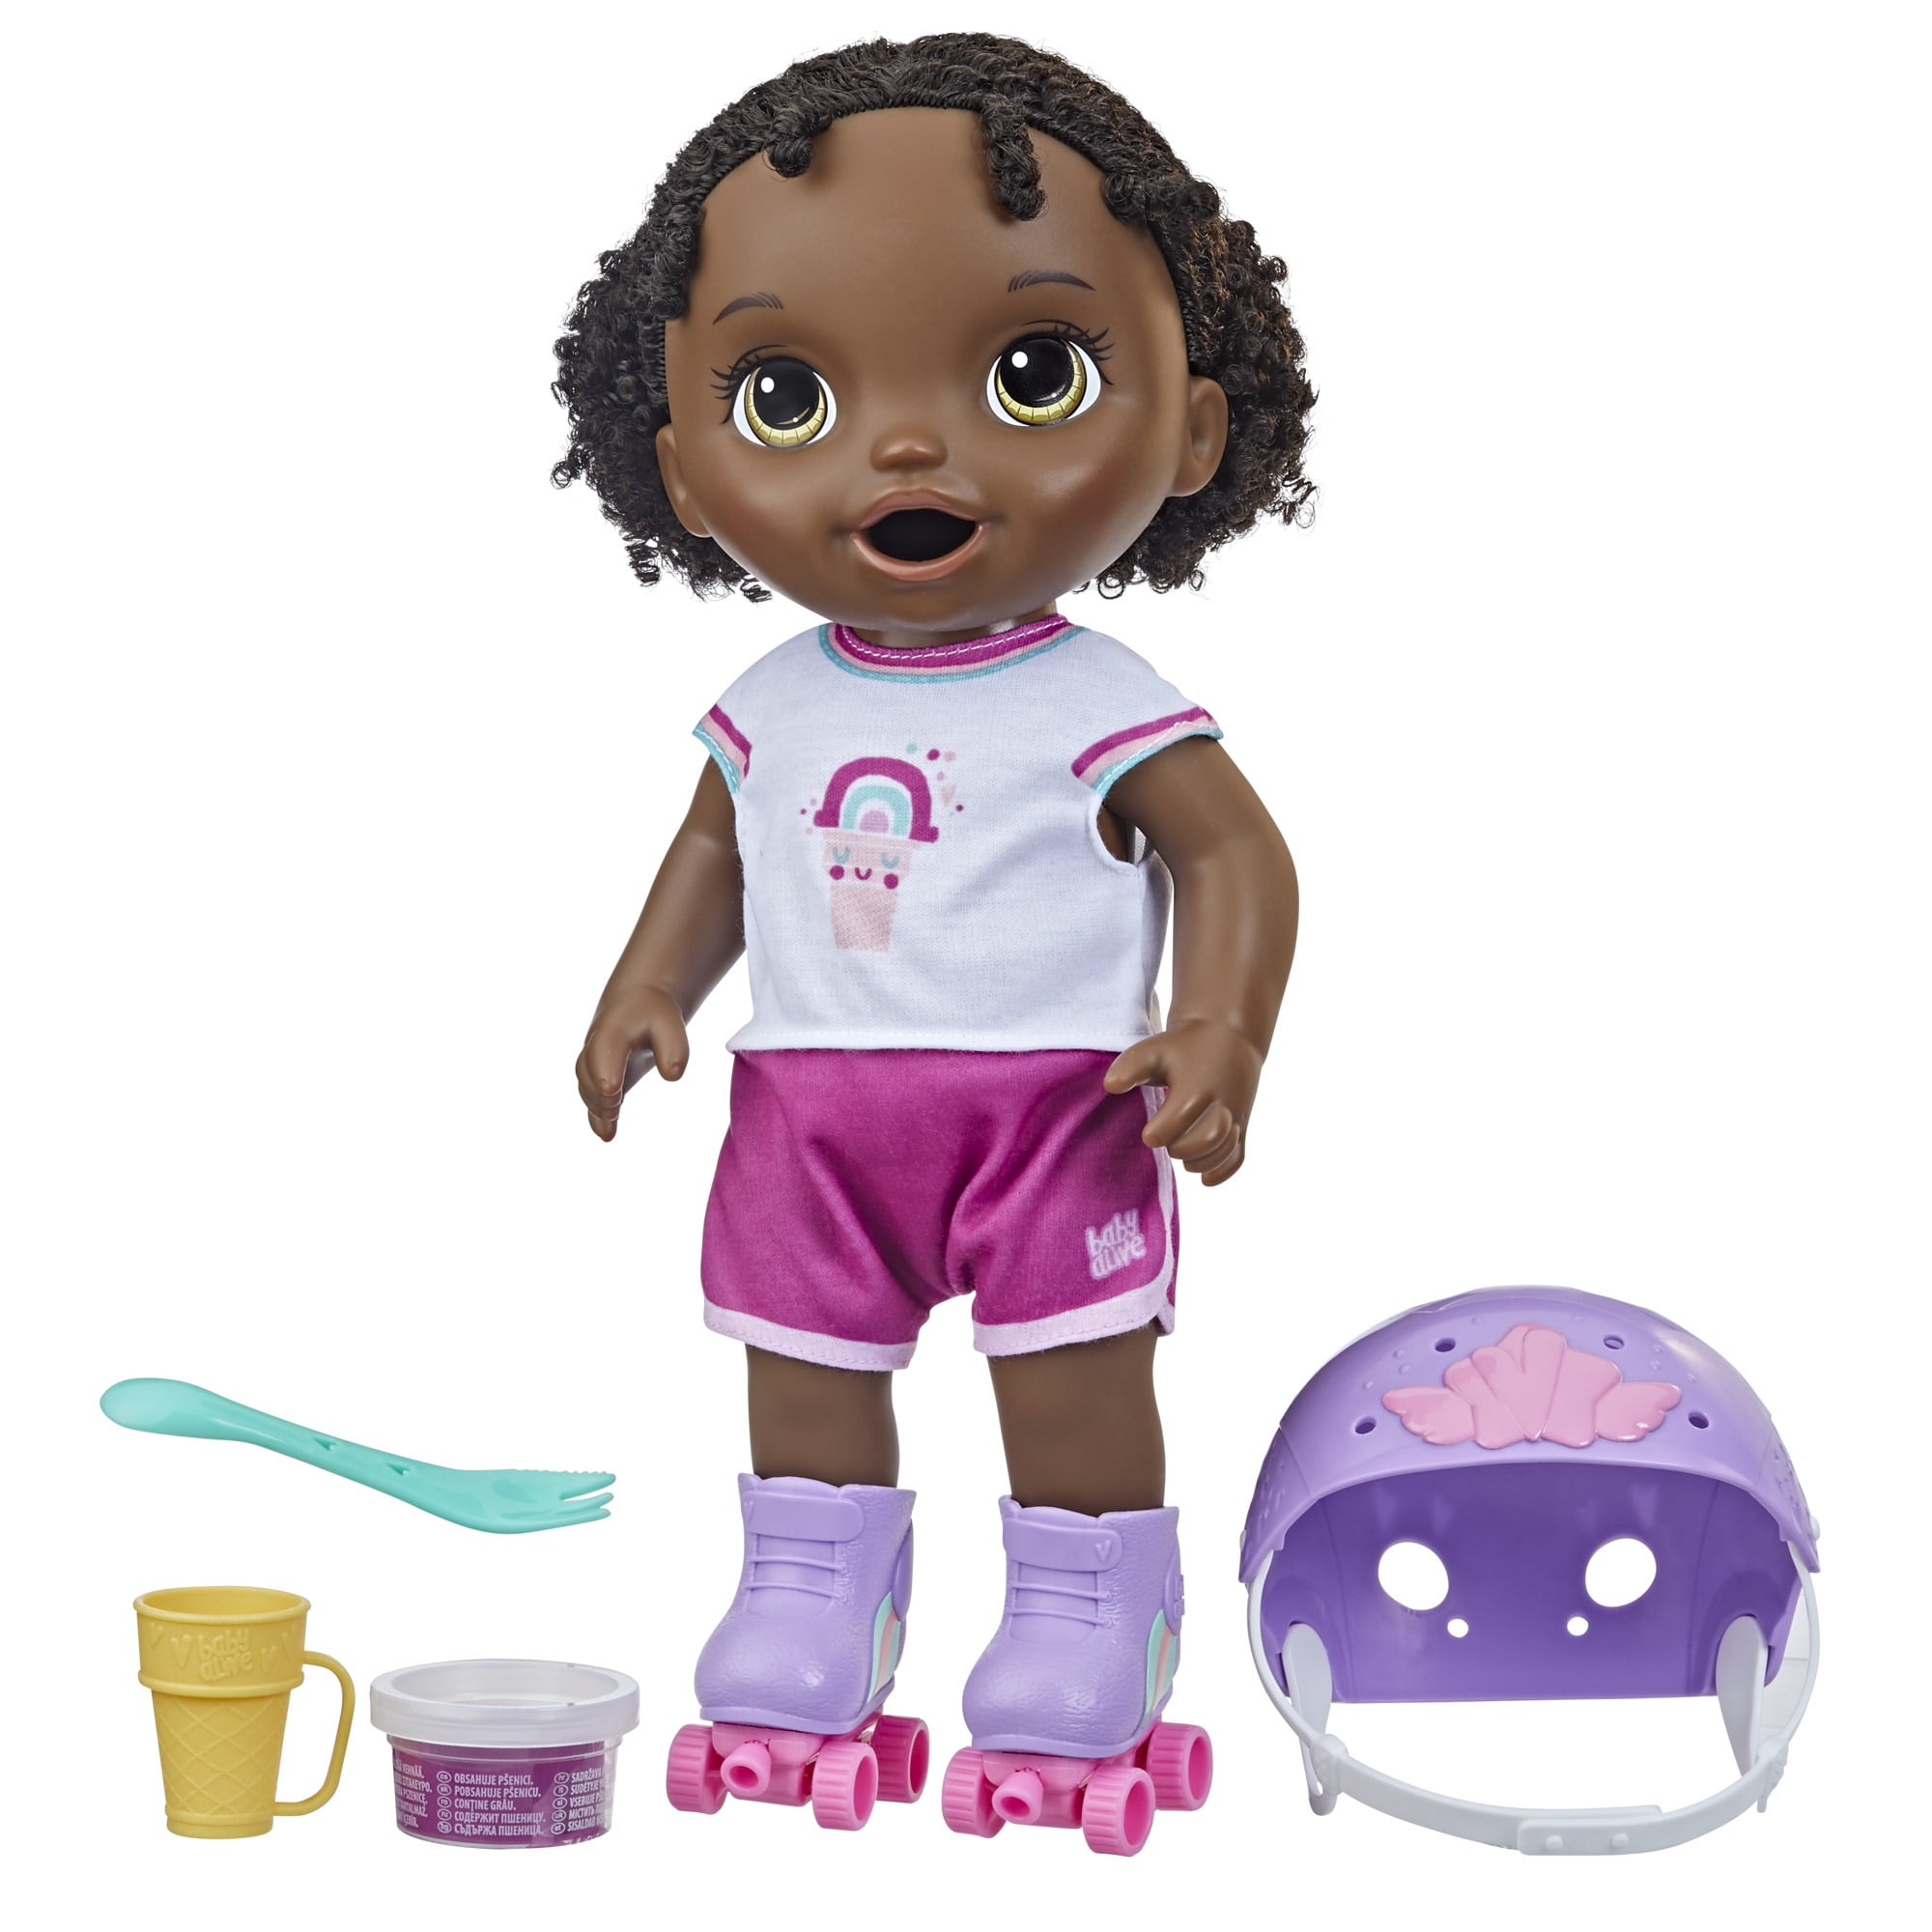 Baby Alive Roller Skate Baby Doll, Eats and “Poops,” Doll with Roller Skates, Black Hair